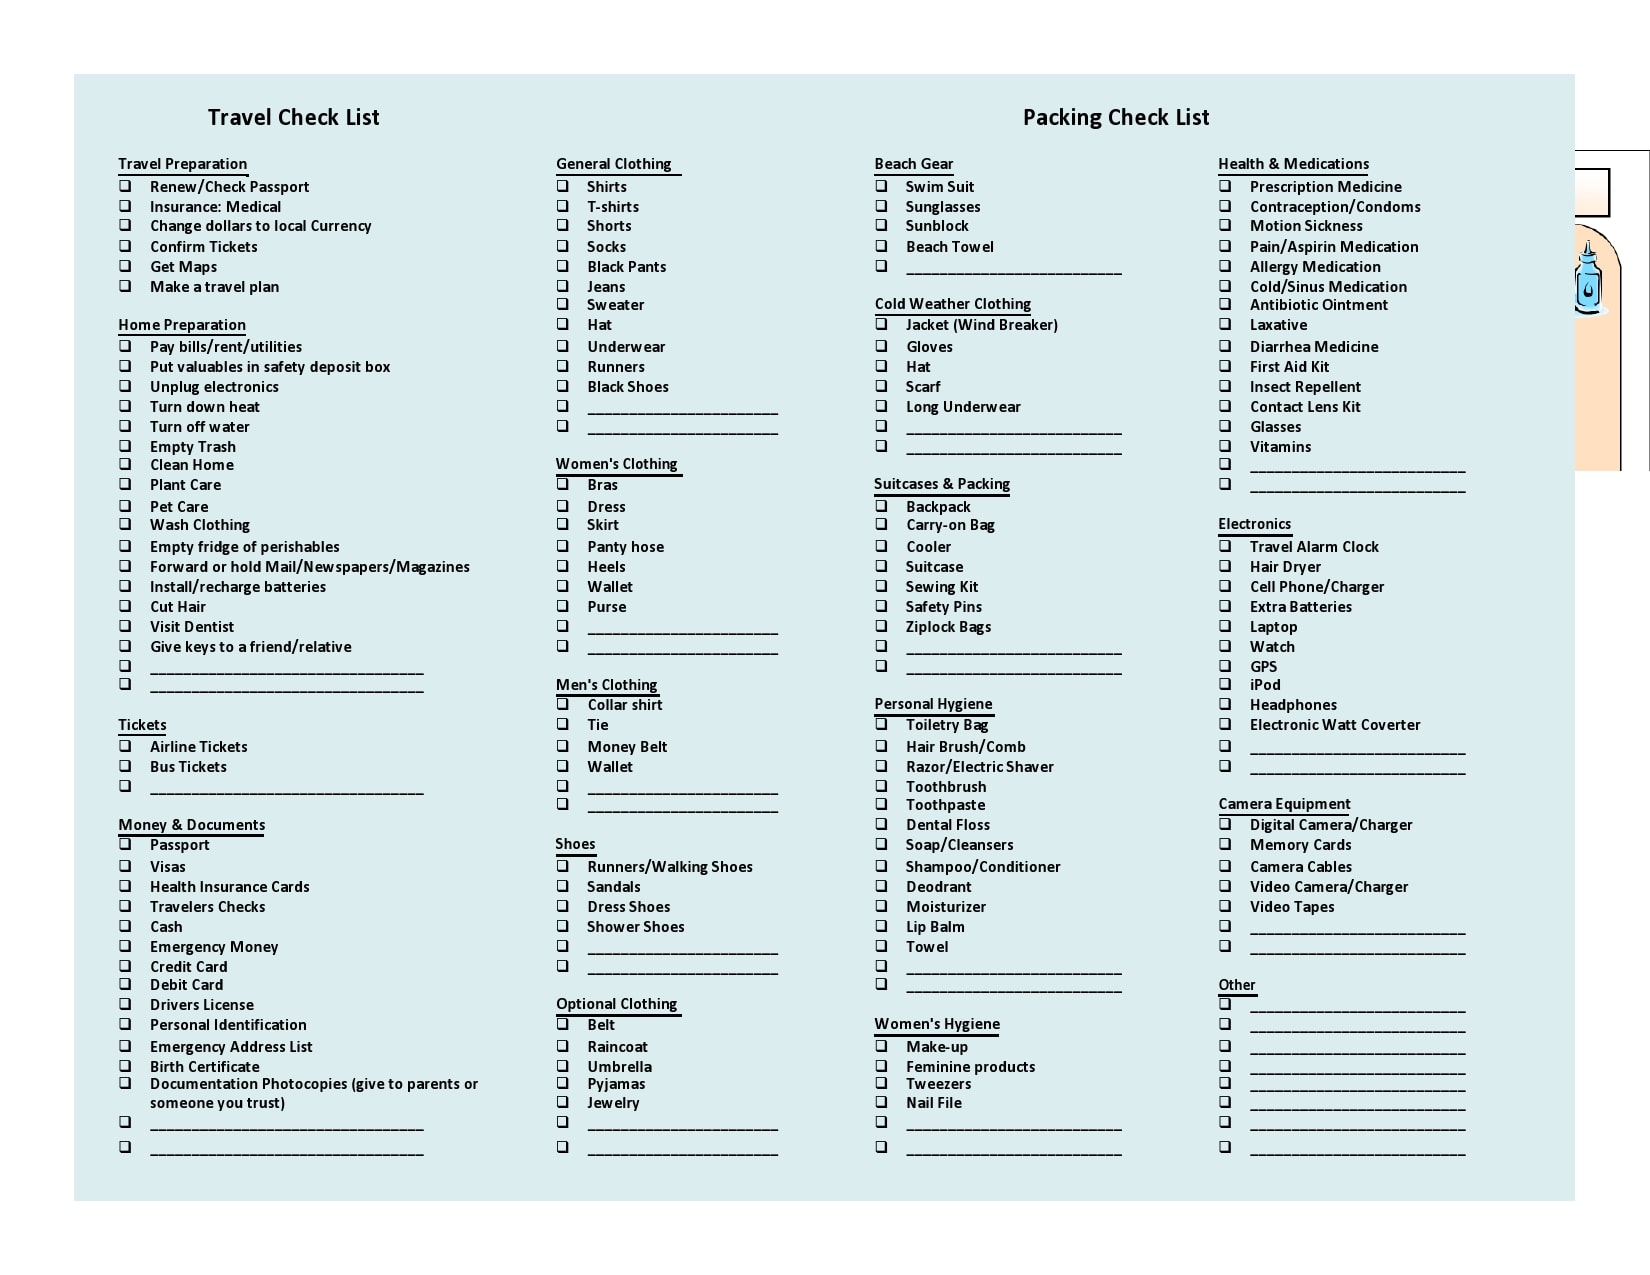 10 Packing List Templates [Excel, Word, PDF] - TemplateArchive With Regard To Trip Packing Checklist Template In Trip Packing Checklist Template